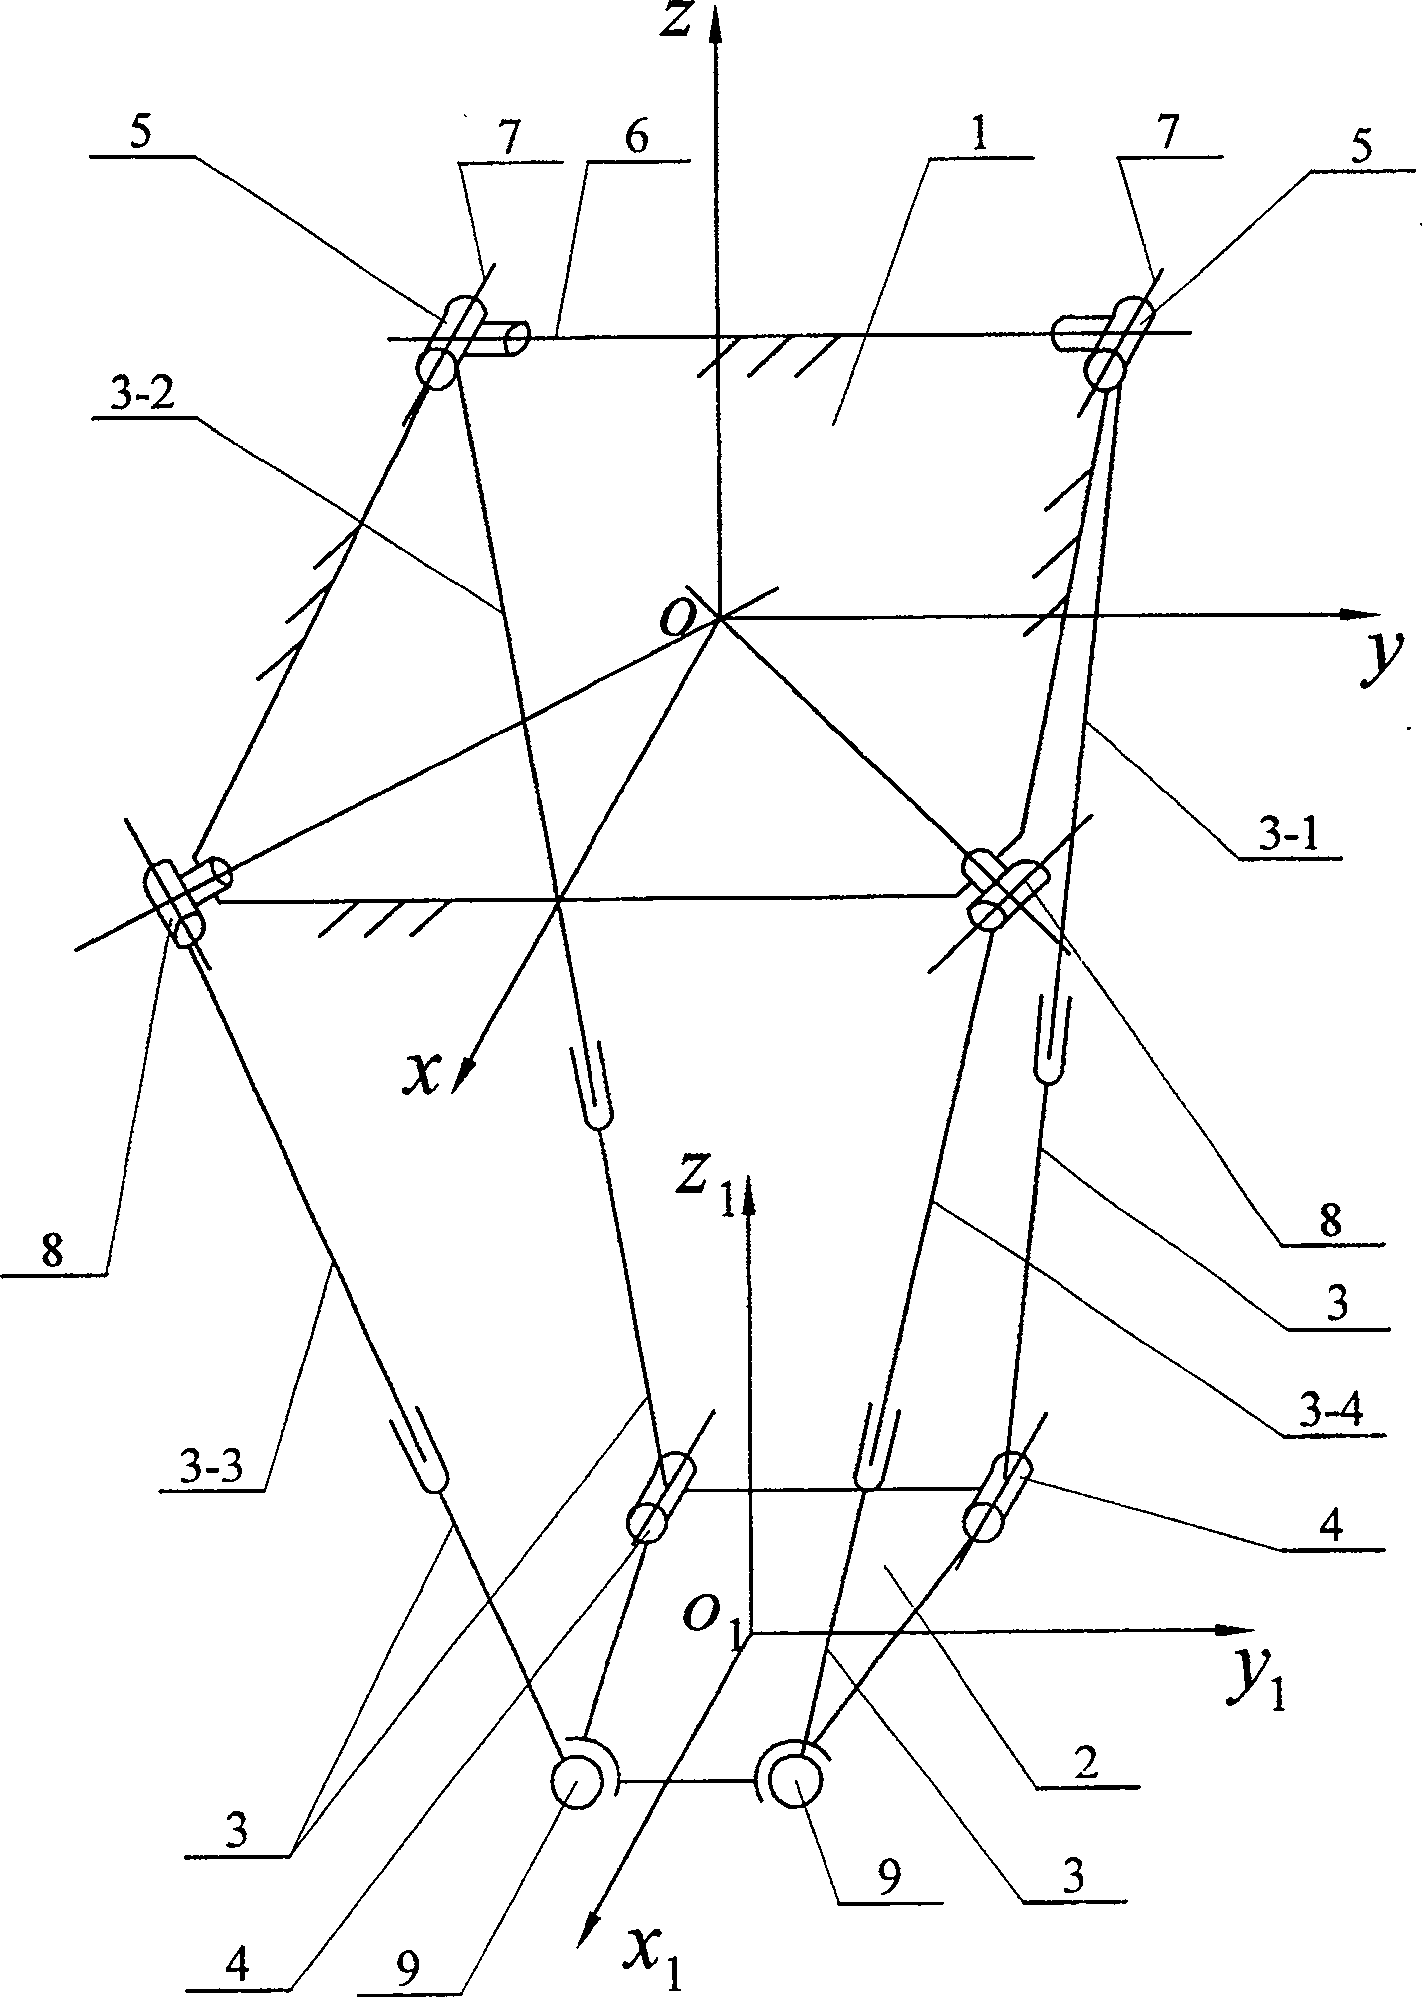 Parallel mechanism with four degrees of freedom